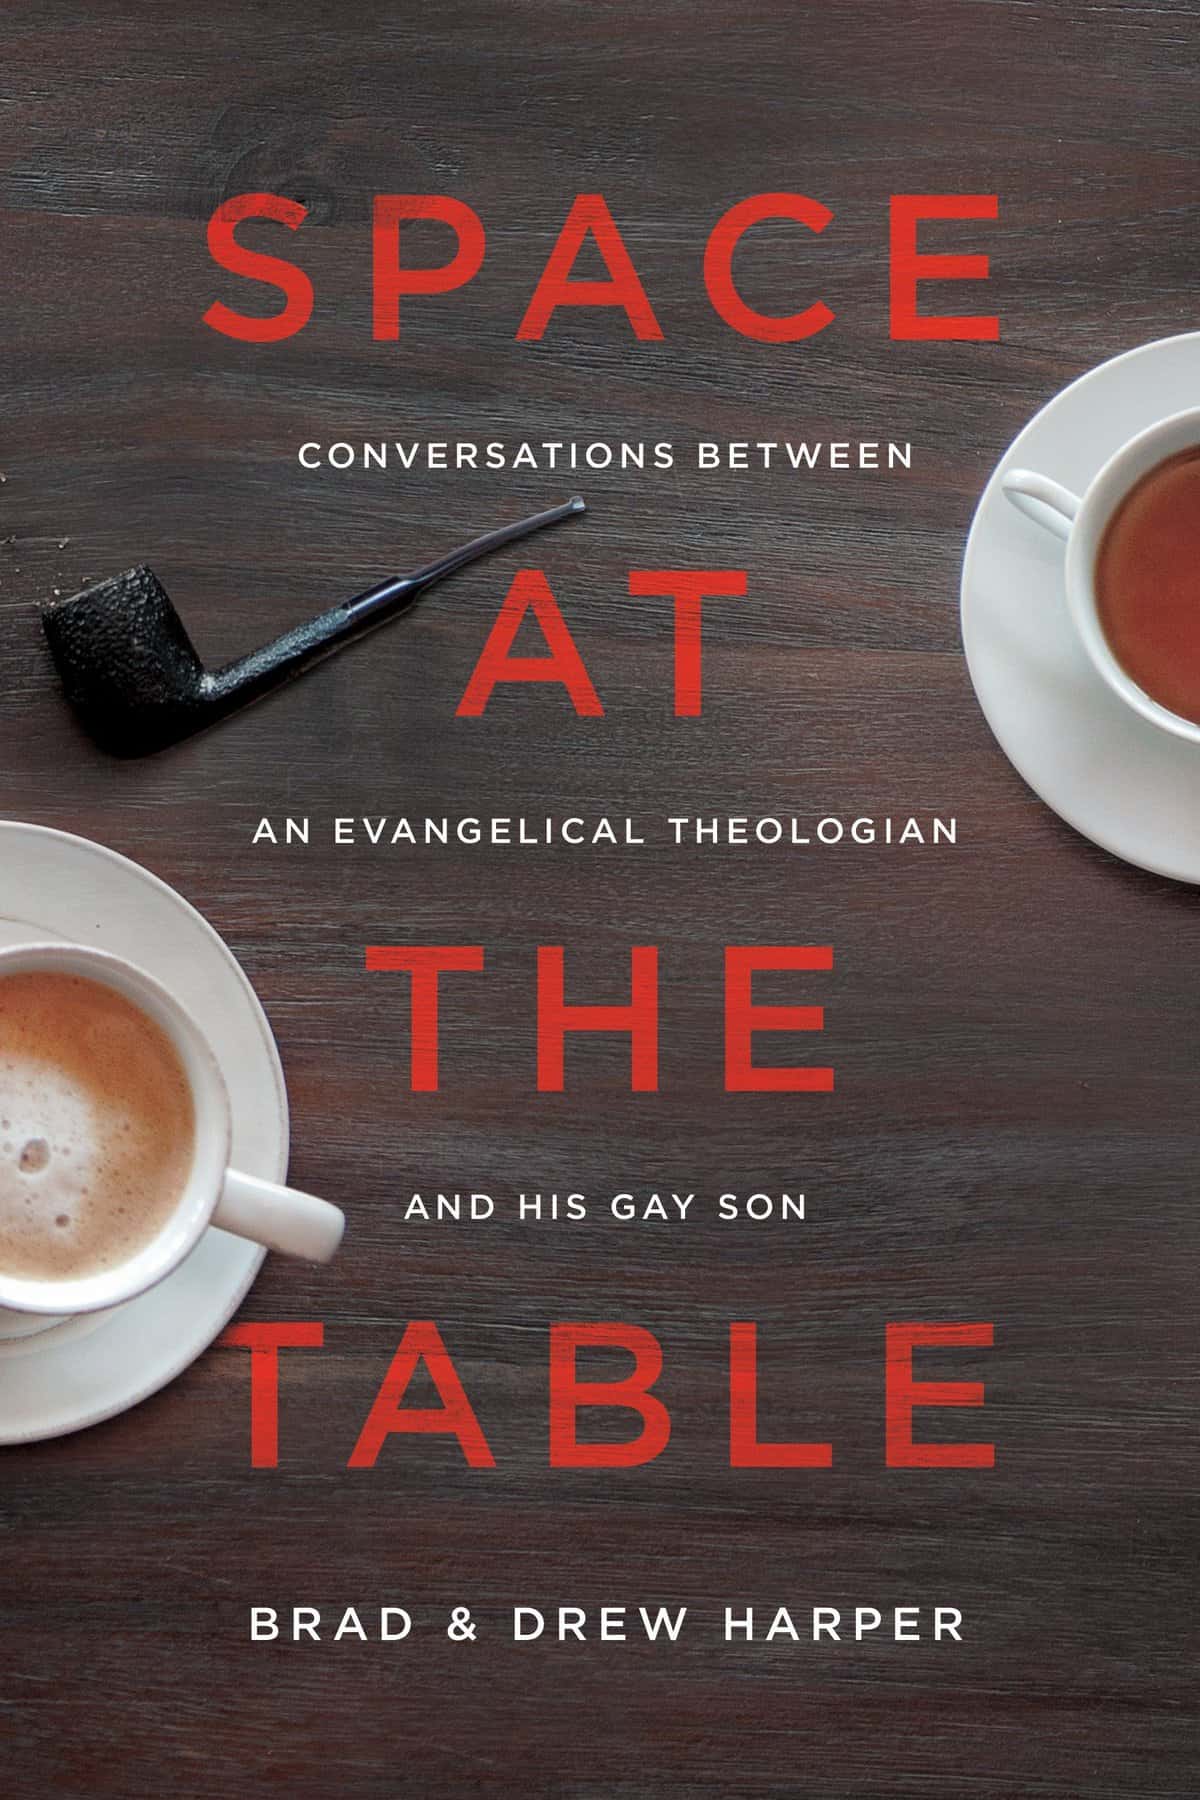 A Space at the Table: Conversations Between an Evangelical Theologian and His Gay Son